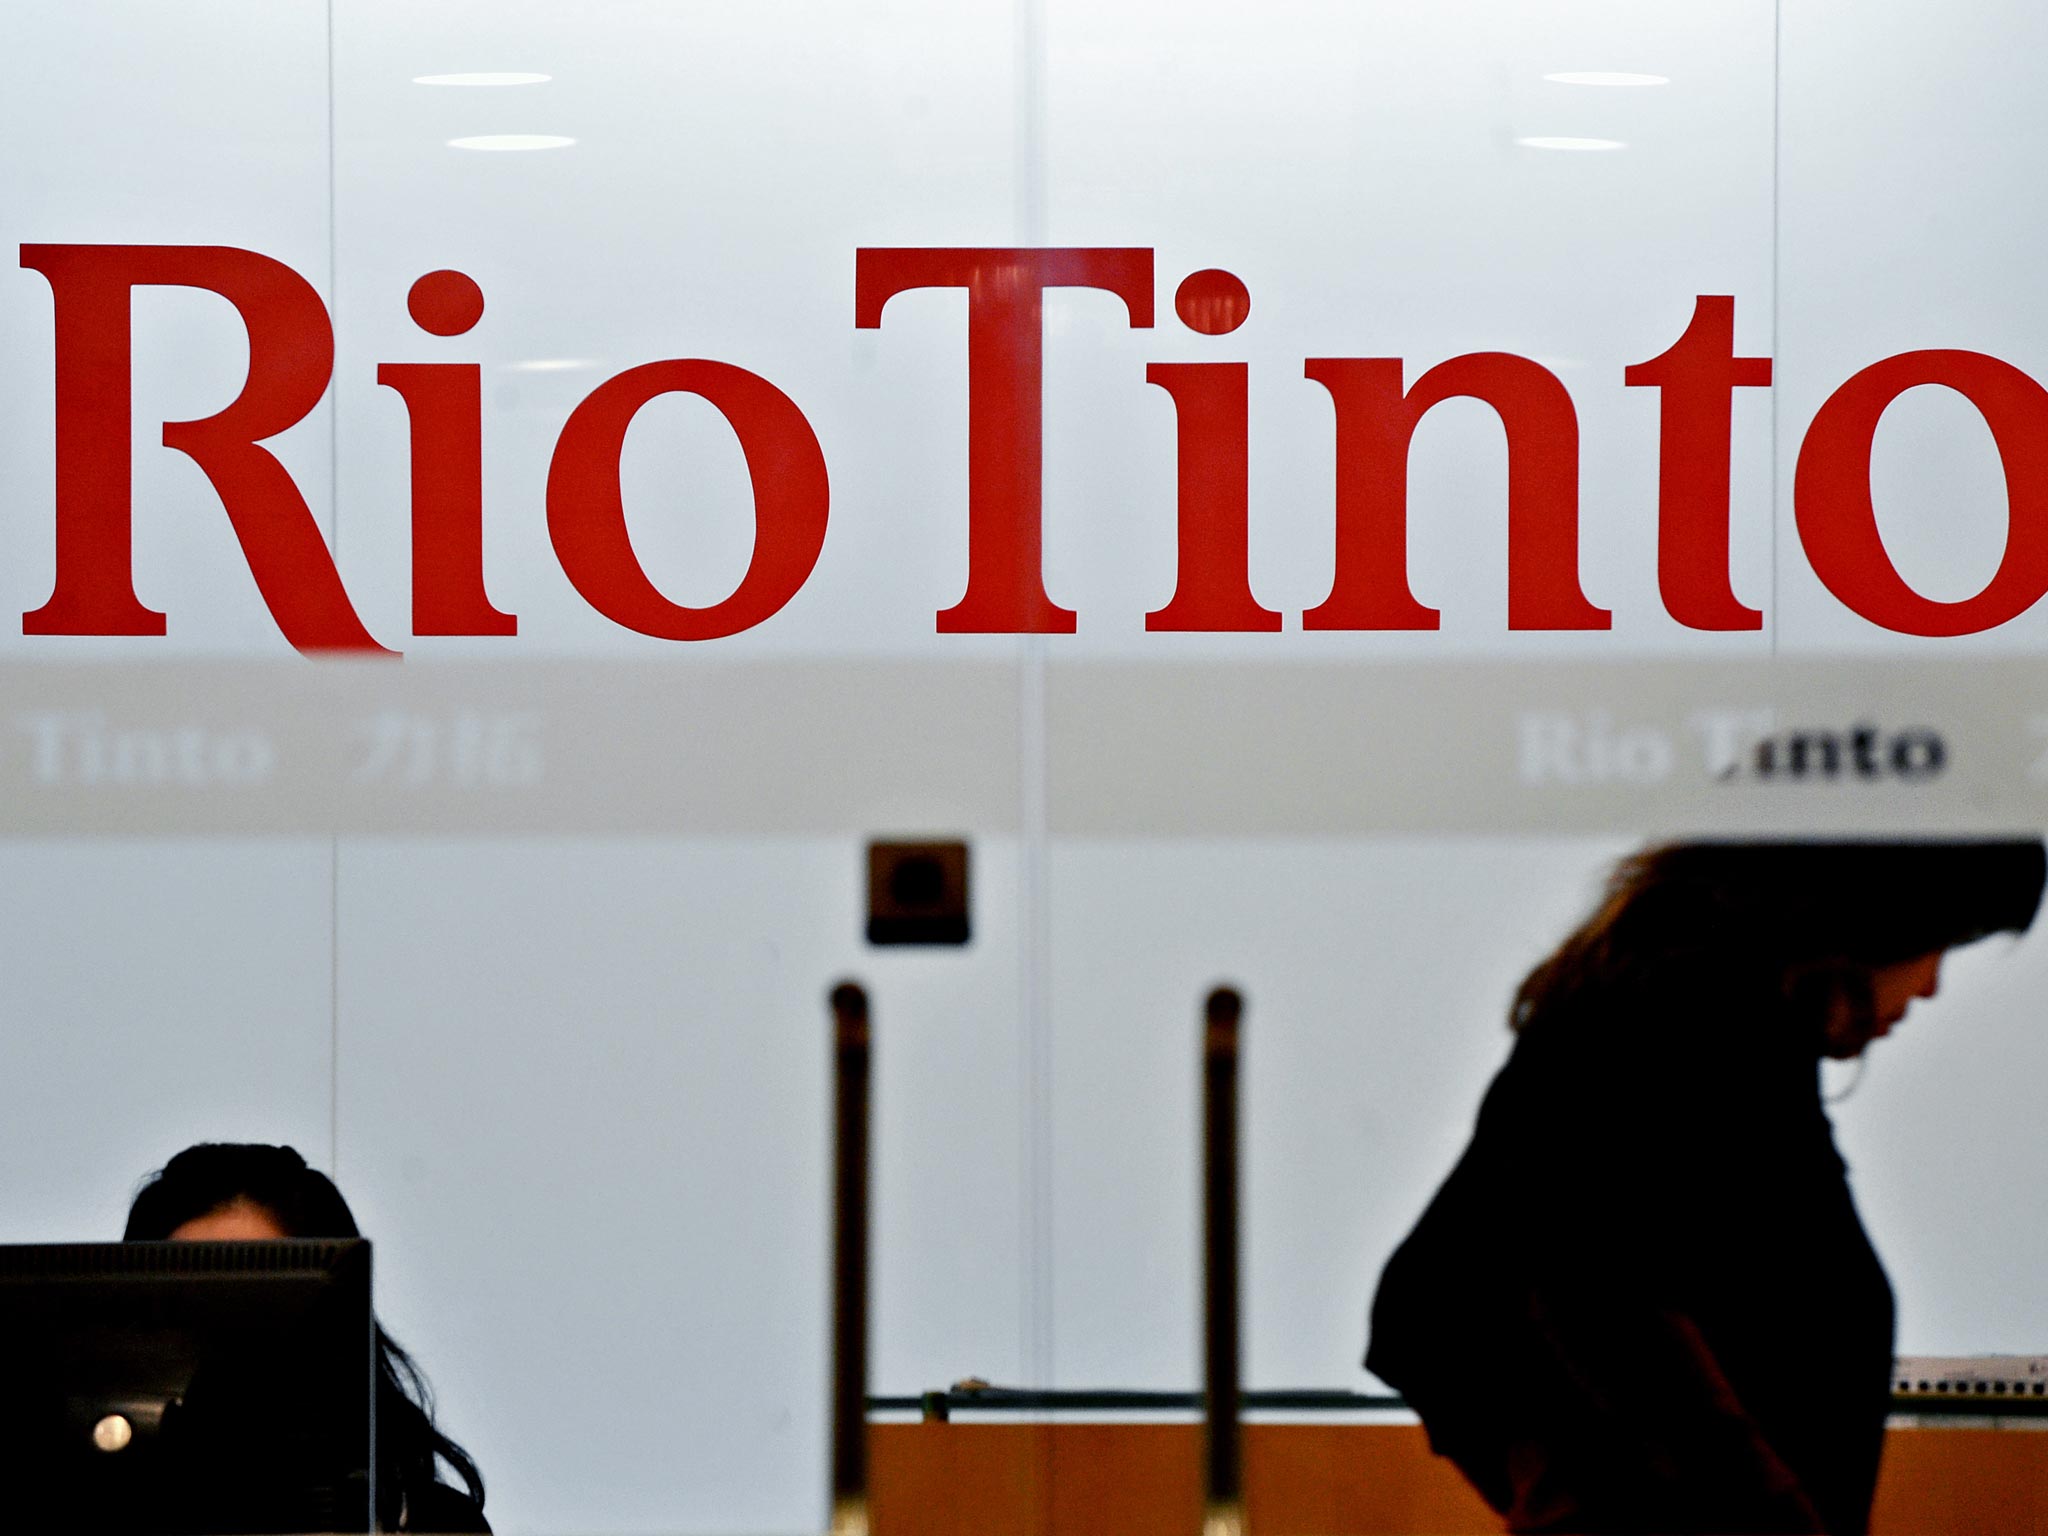 Rio Tinto has filed a lawsuit in New York against Beny Steinmetz, alleging bribery of a Guinean official